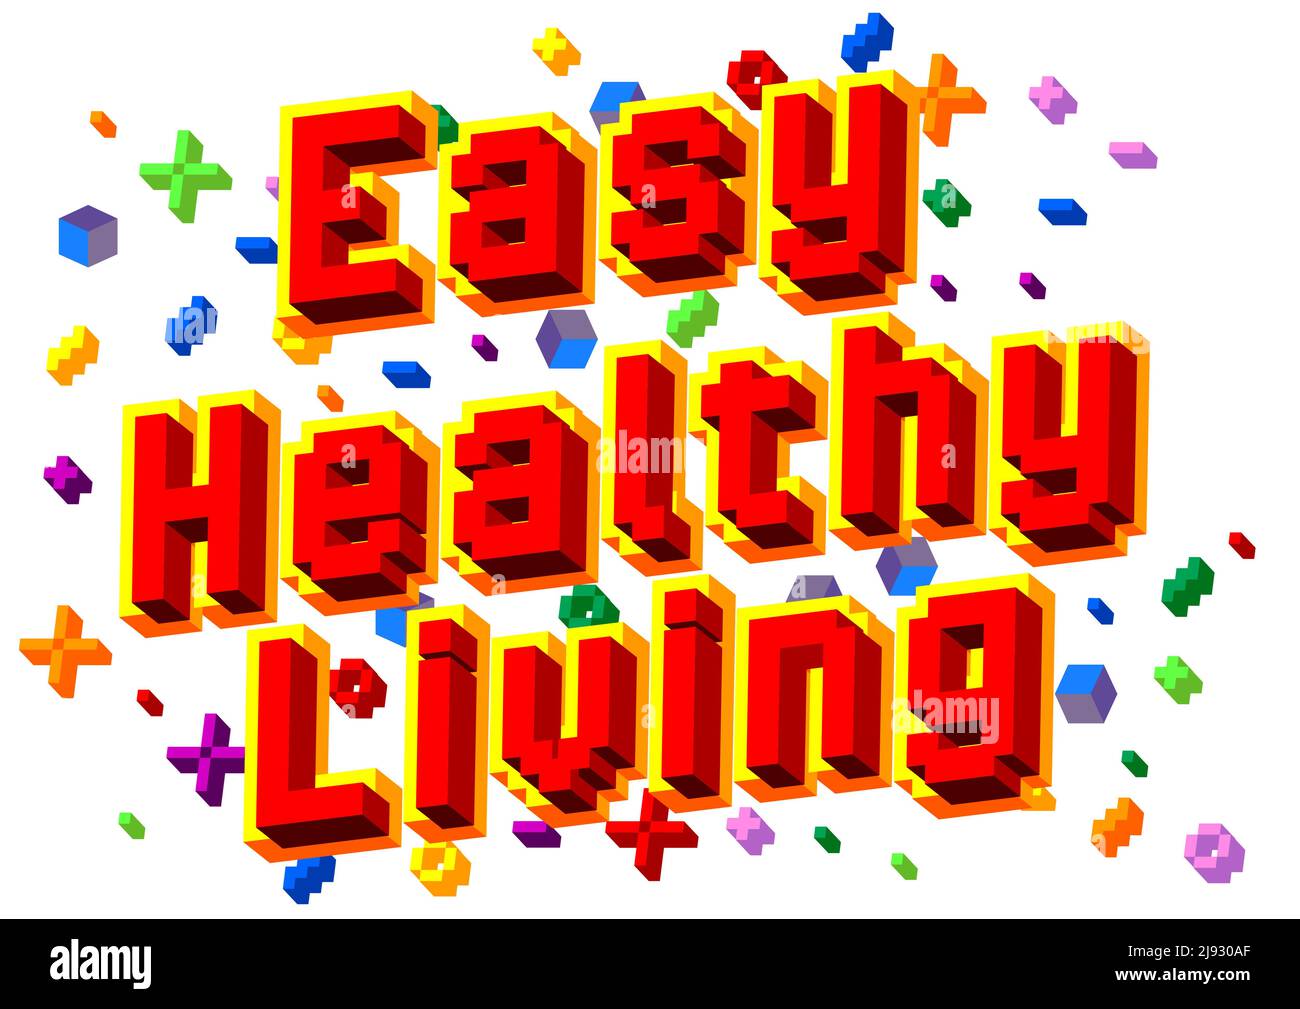 Easy Healthy Living. Pixelated word with geometric graphic background. Vector cartoon illustration. Stock Vector